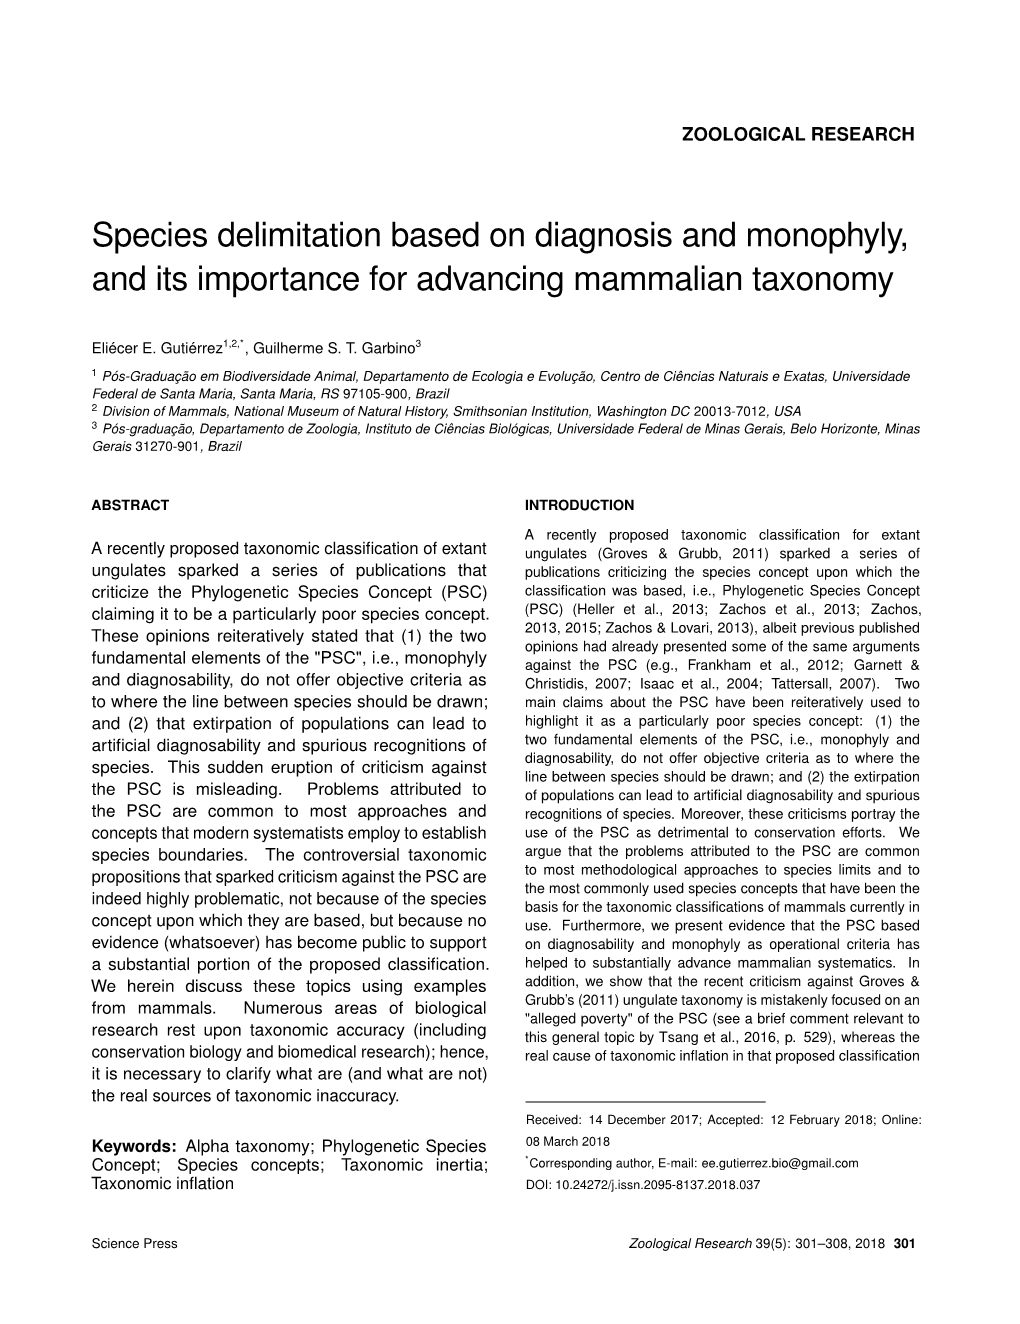 Species Delimitation Based on Diagnosis and Monophyly, and Its Importance for Advancing Mammalian Taxonomy